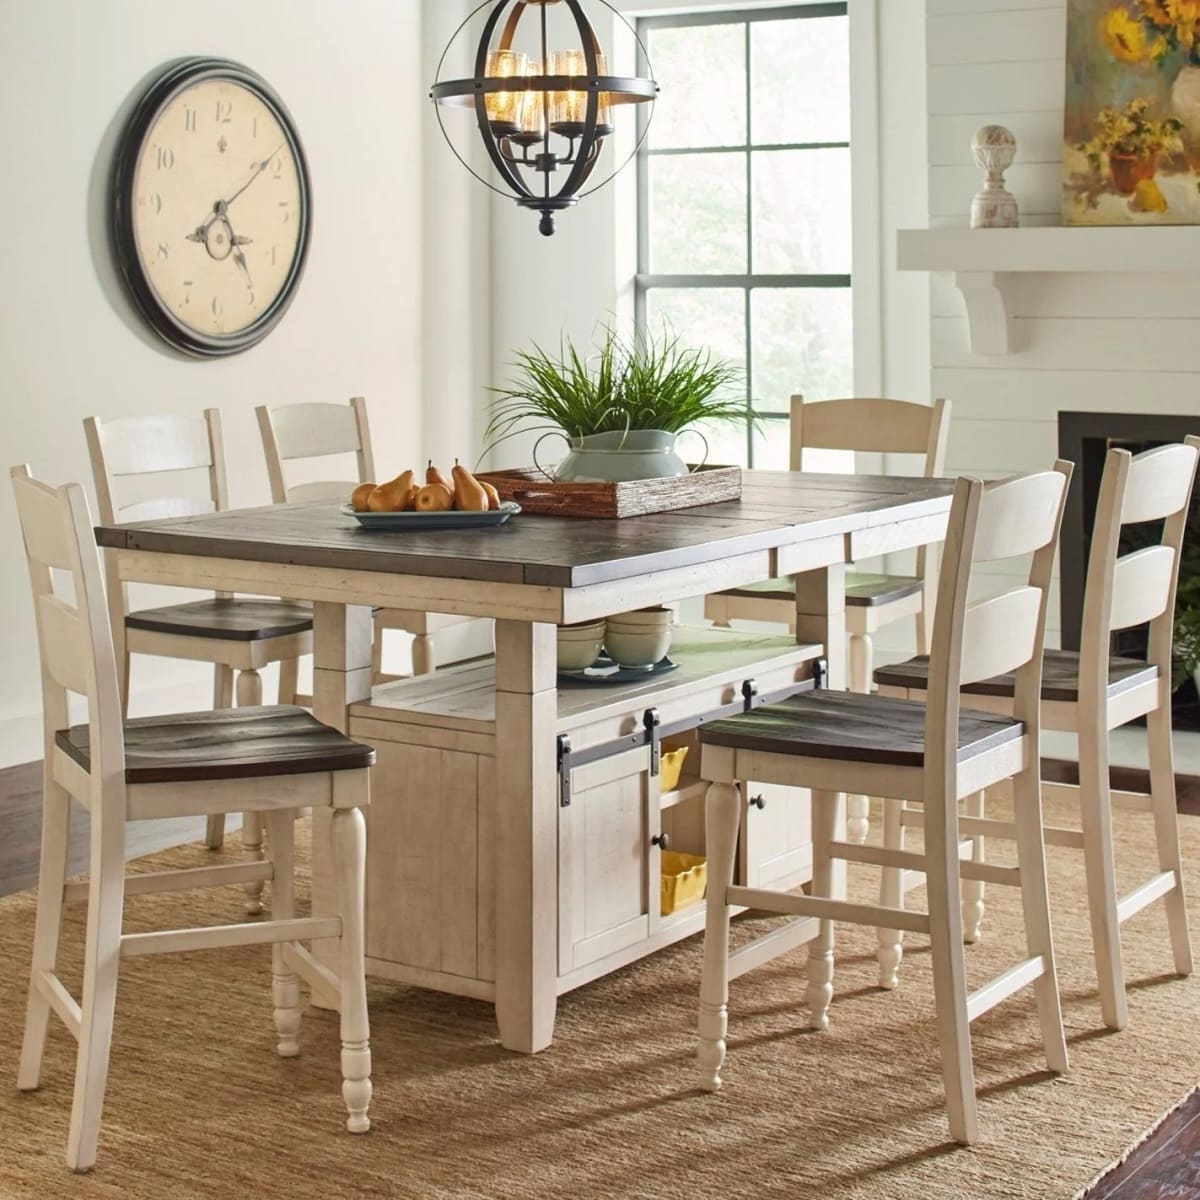 How To Increase The Height Of Dining Chairs